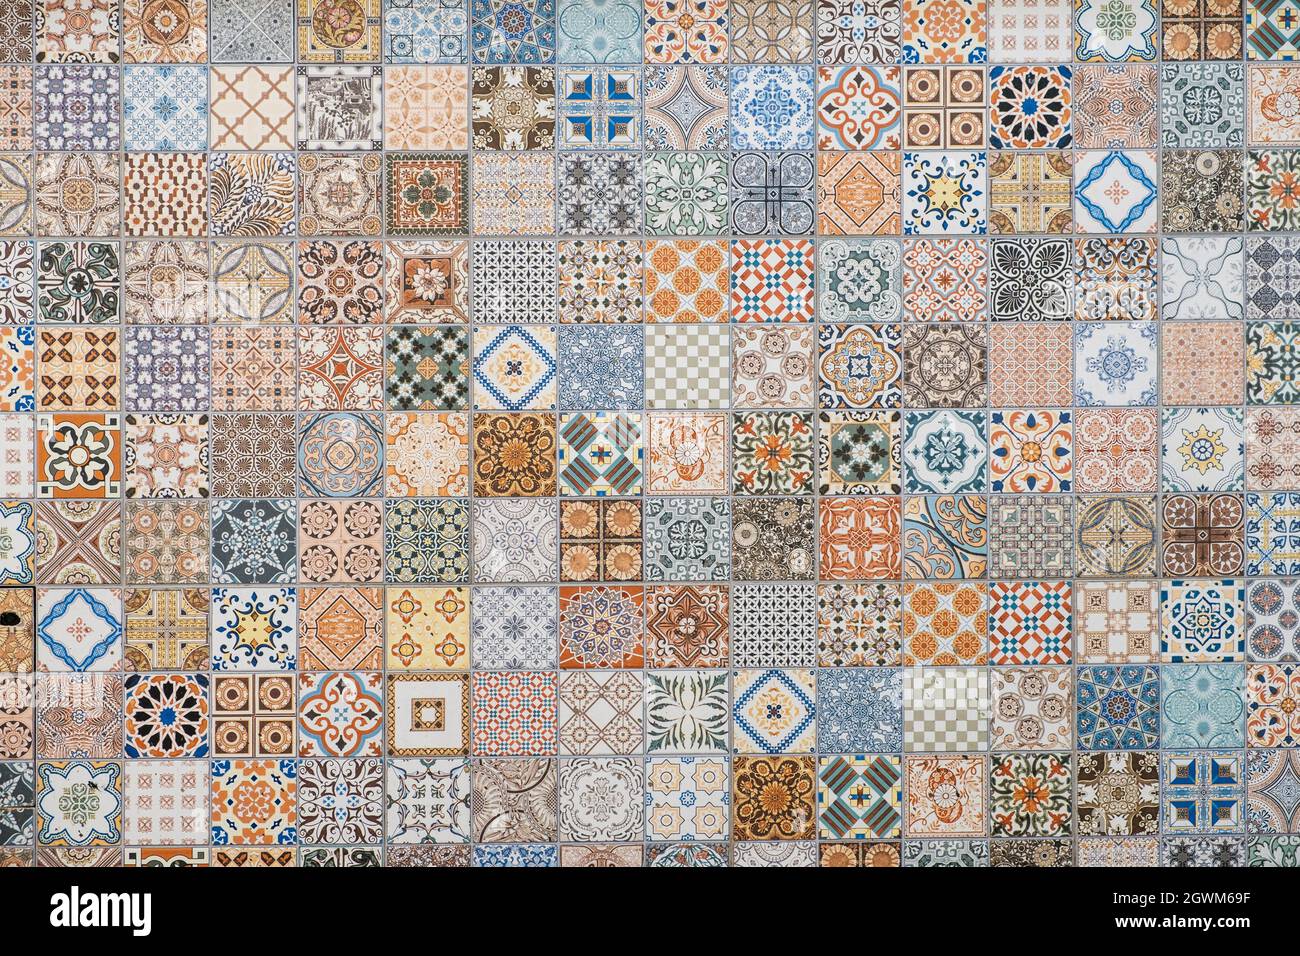 colorful tile pattern, patchwork design of portuguese tiles Stock Photo